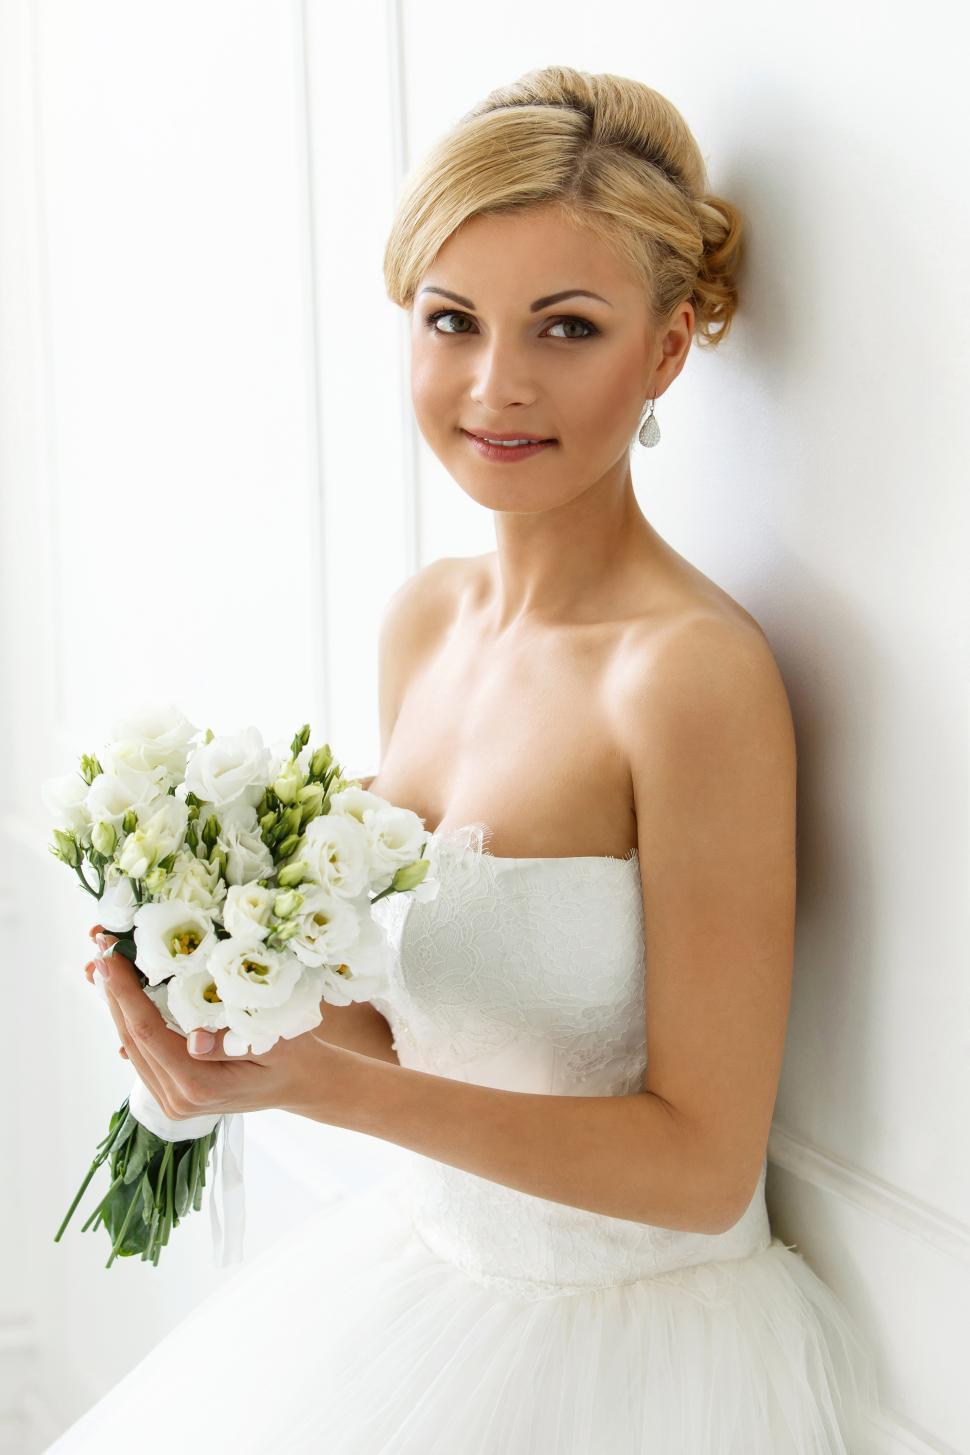 Free Image of Wedding. Bride with bouquet of white flowers 